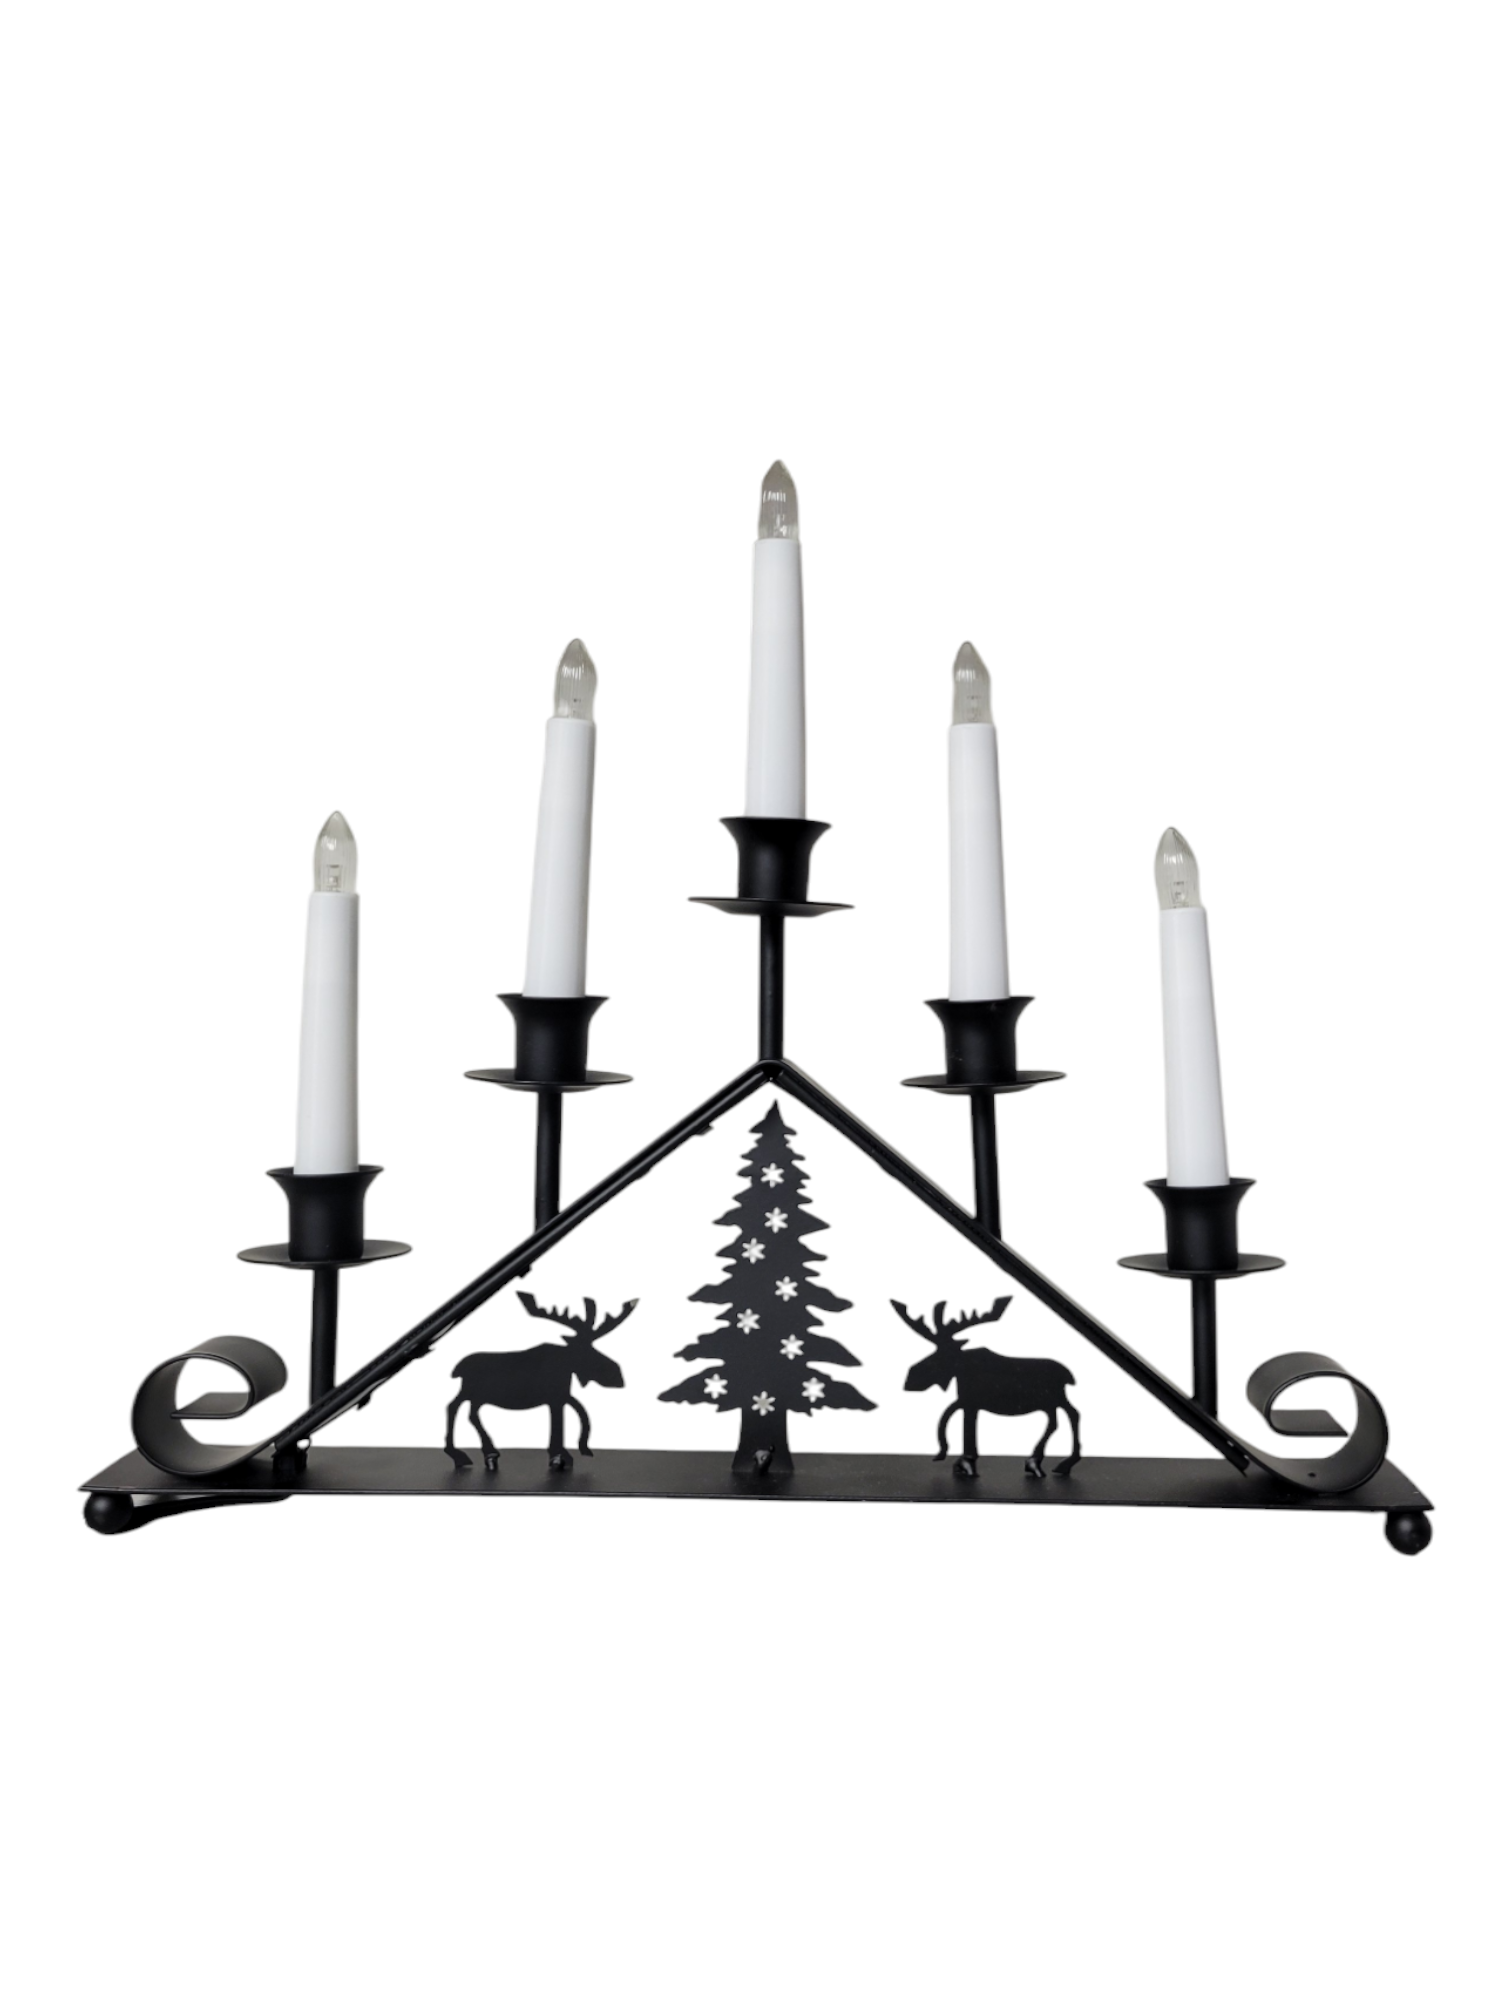 Candelabra: Scandlights - Tor, Wrought Iron, Battery Operated 5-Light